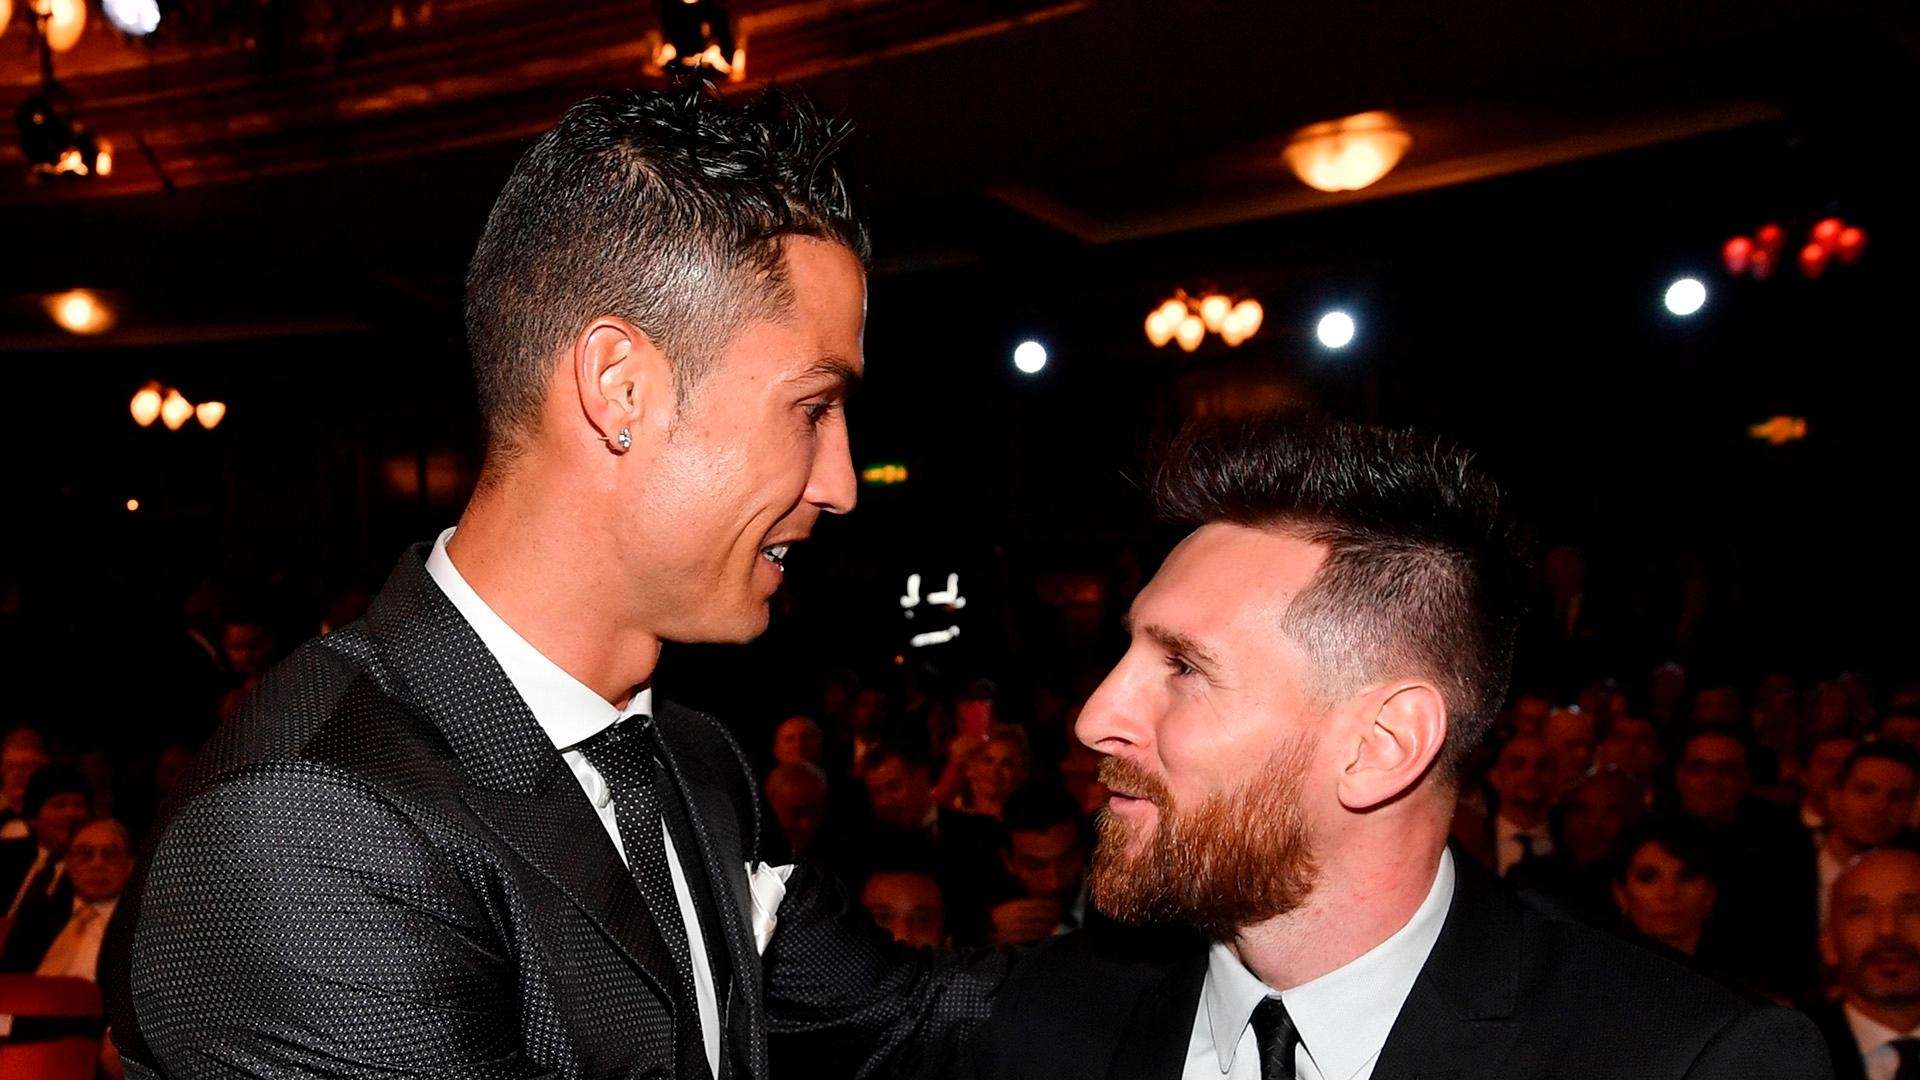 Cristiano Ronaldo and Lionel Messi at FIFA's The Best awards